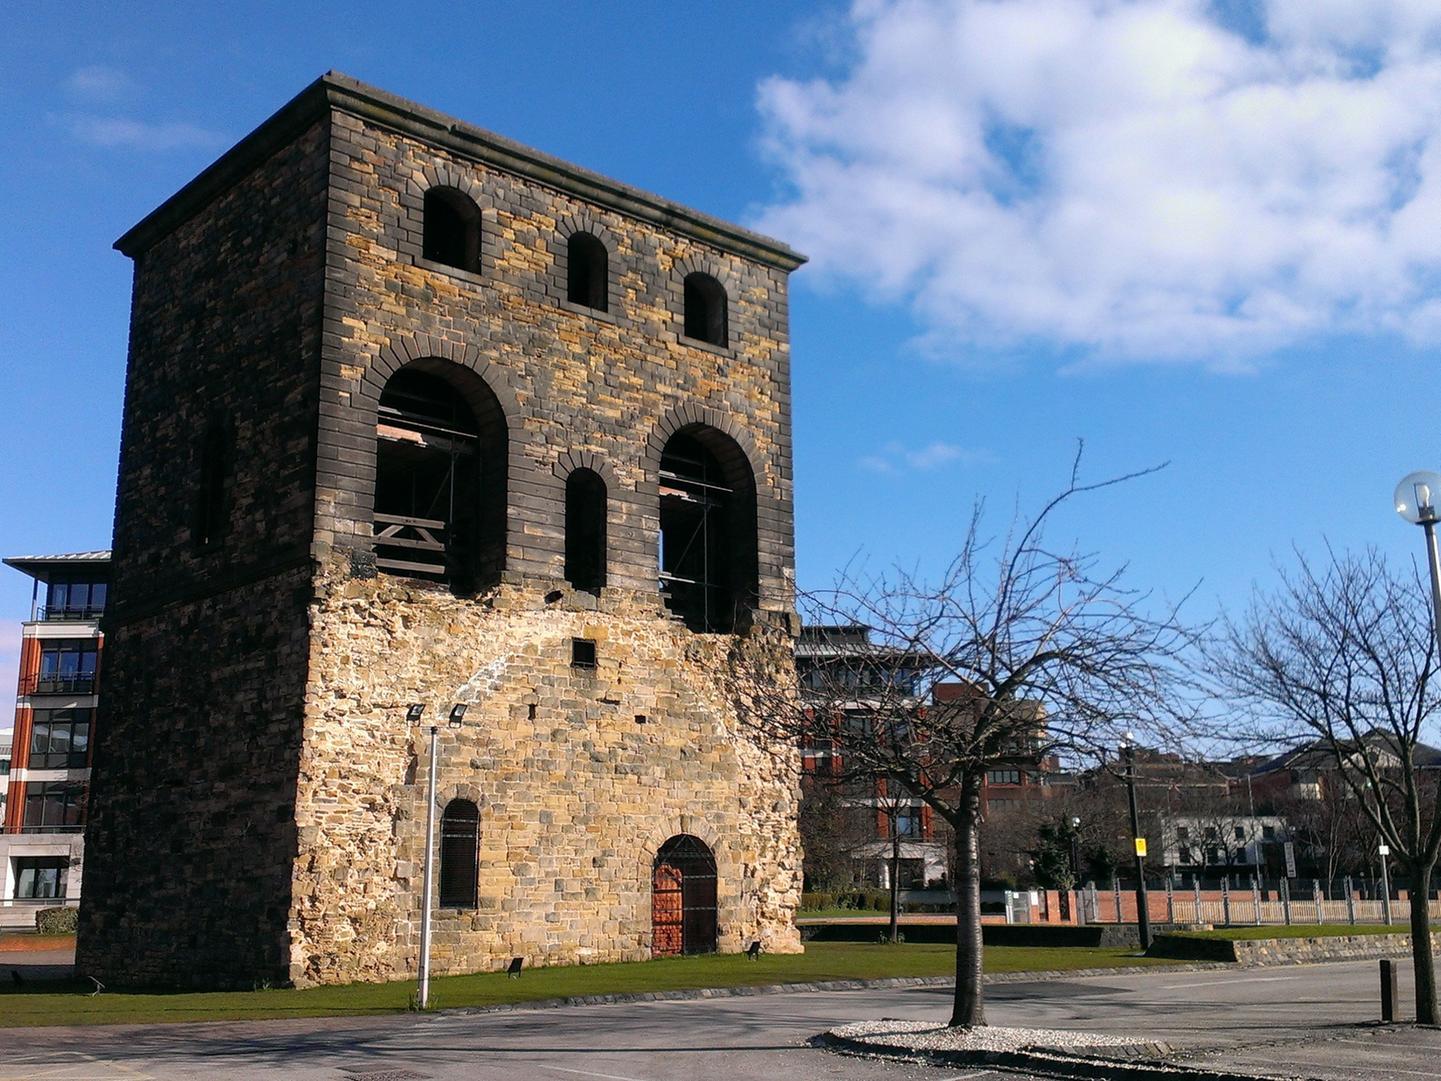 Dating back to 1850, the Lifting Tower acts as a visible reminder of the city's rail heritage. 'It was one of a pair that stood either side of the old viaduct running into the Leeds Central railway station.